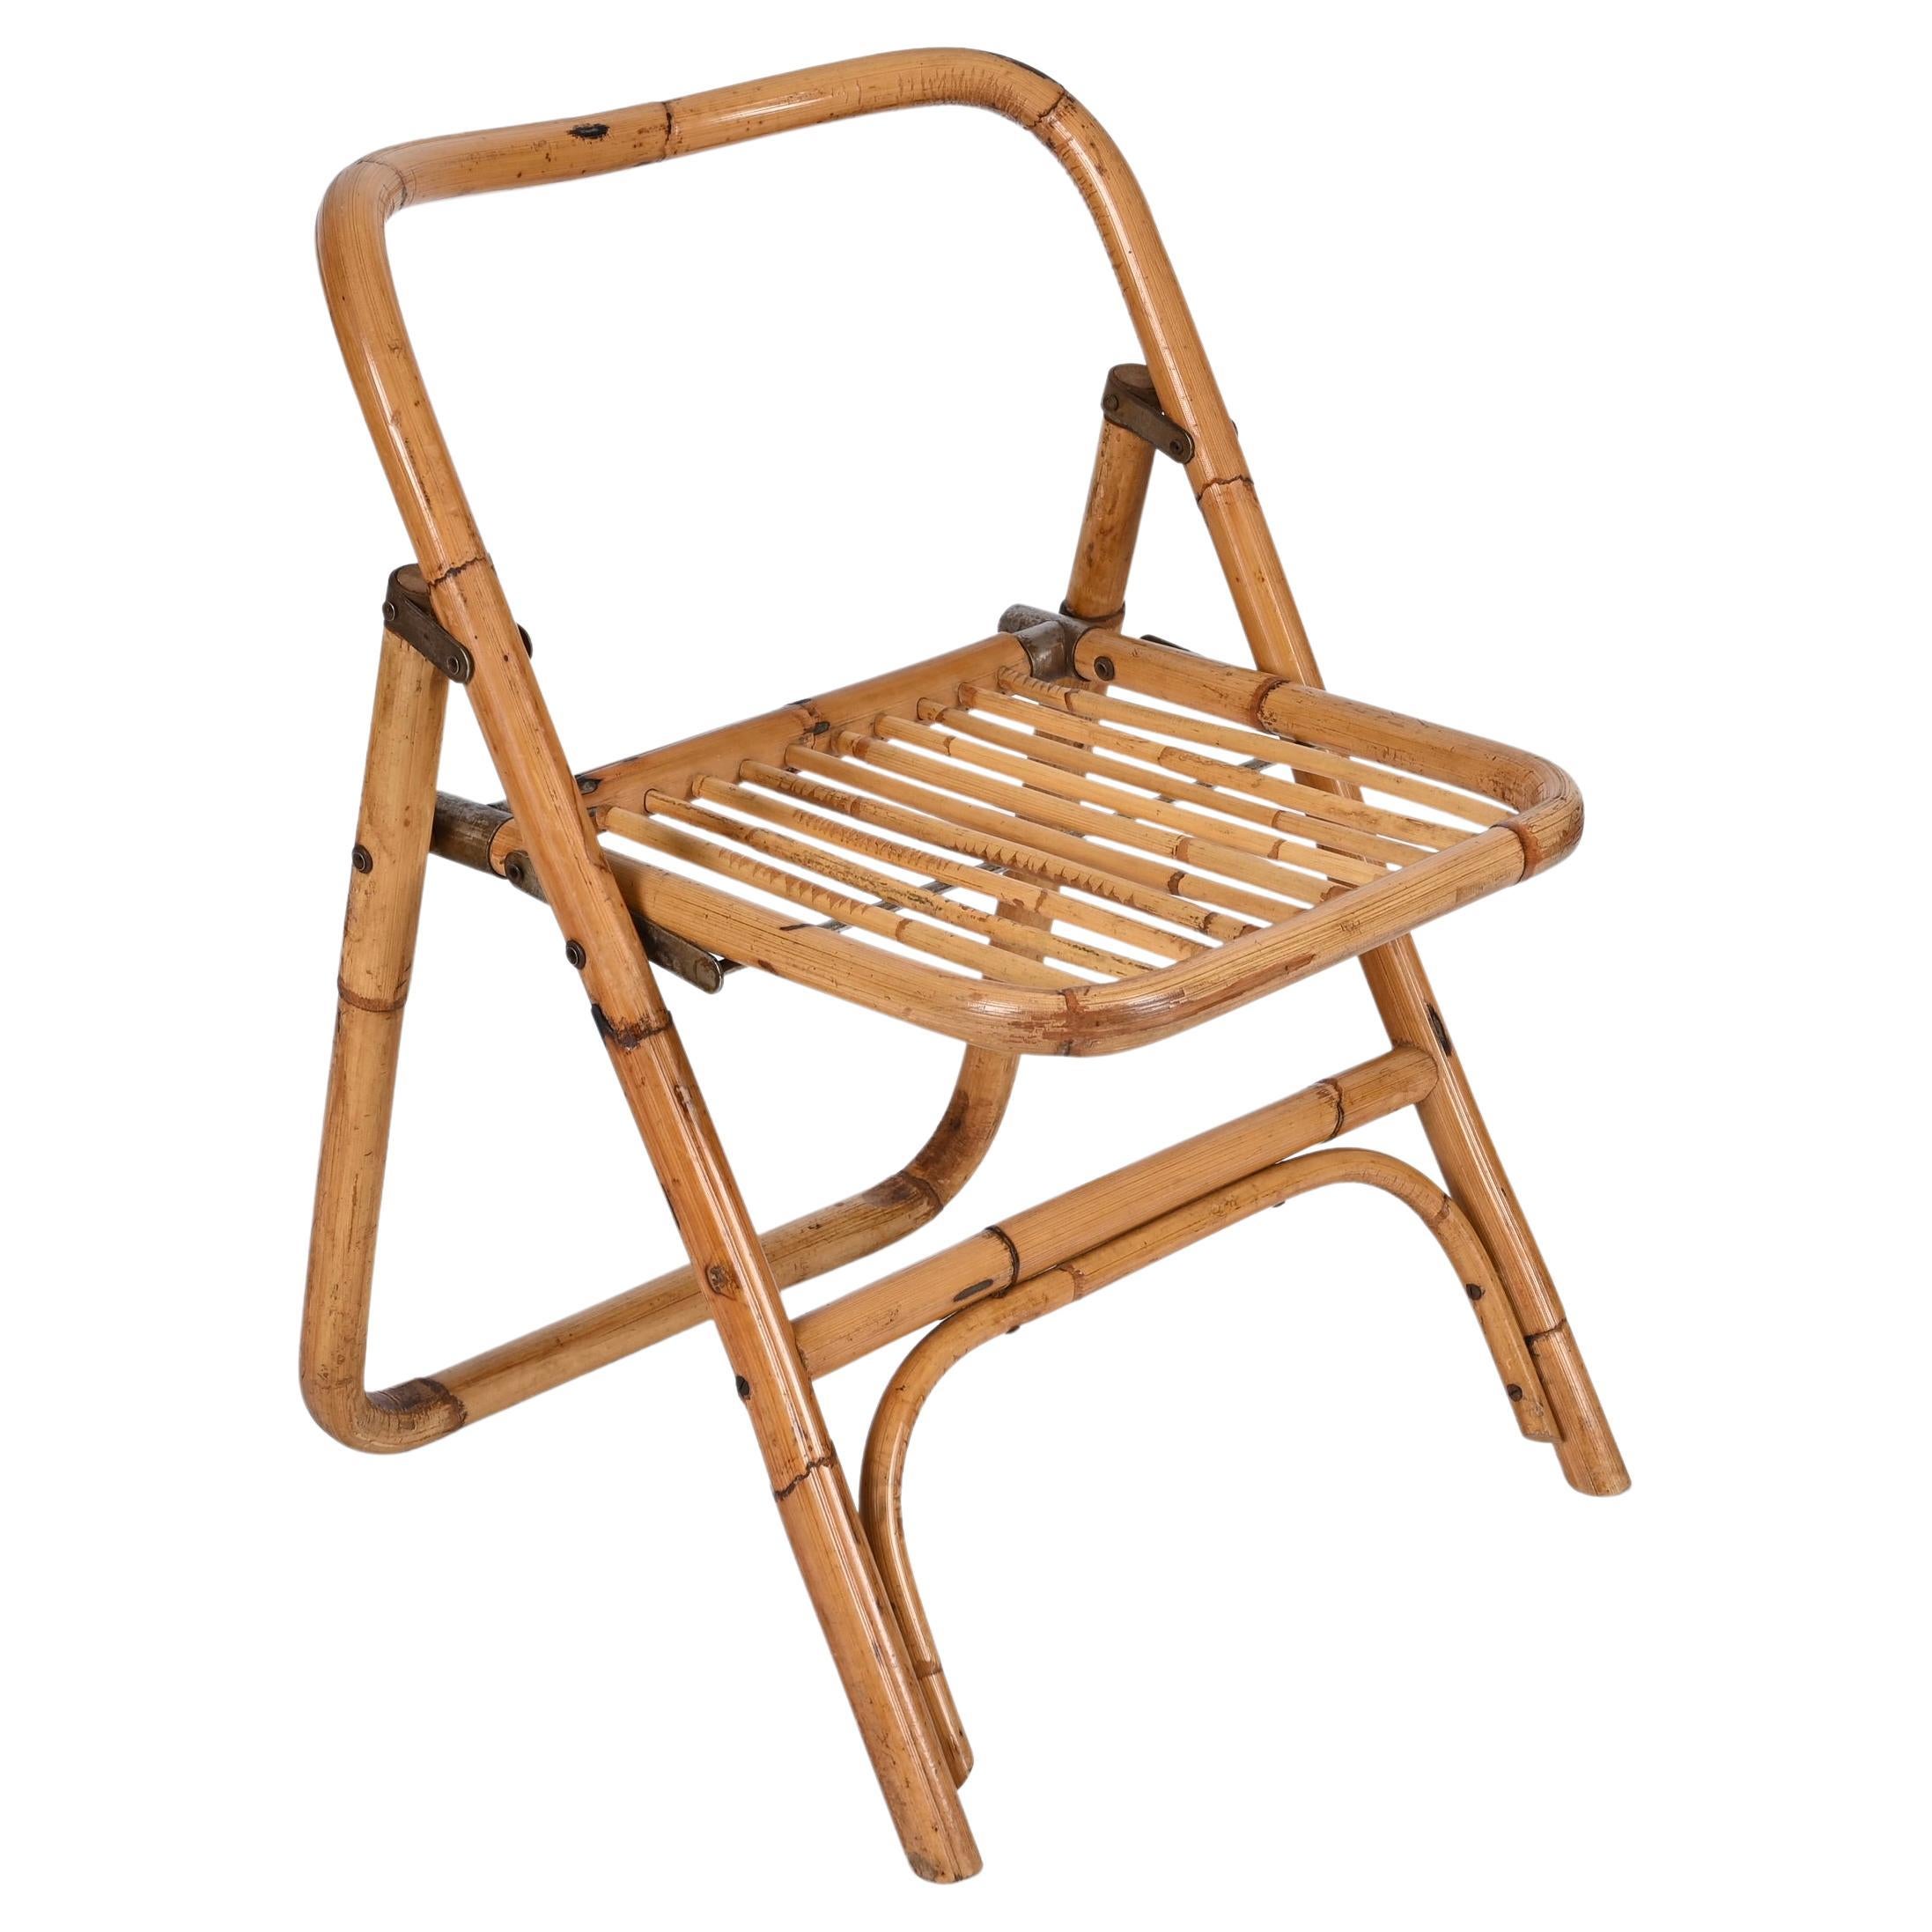 Dal Vera Bamboo Folding Chairs, Italy, 1960s For Sale